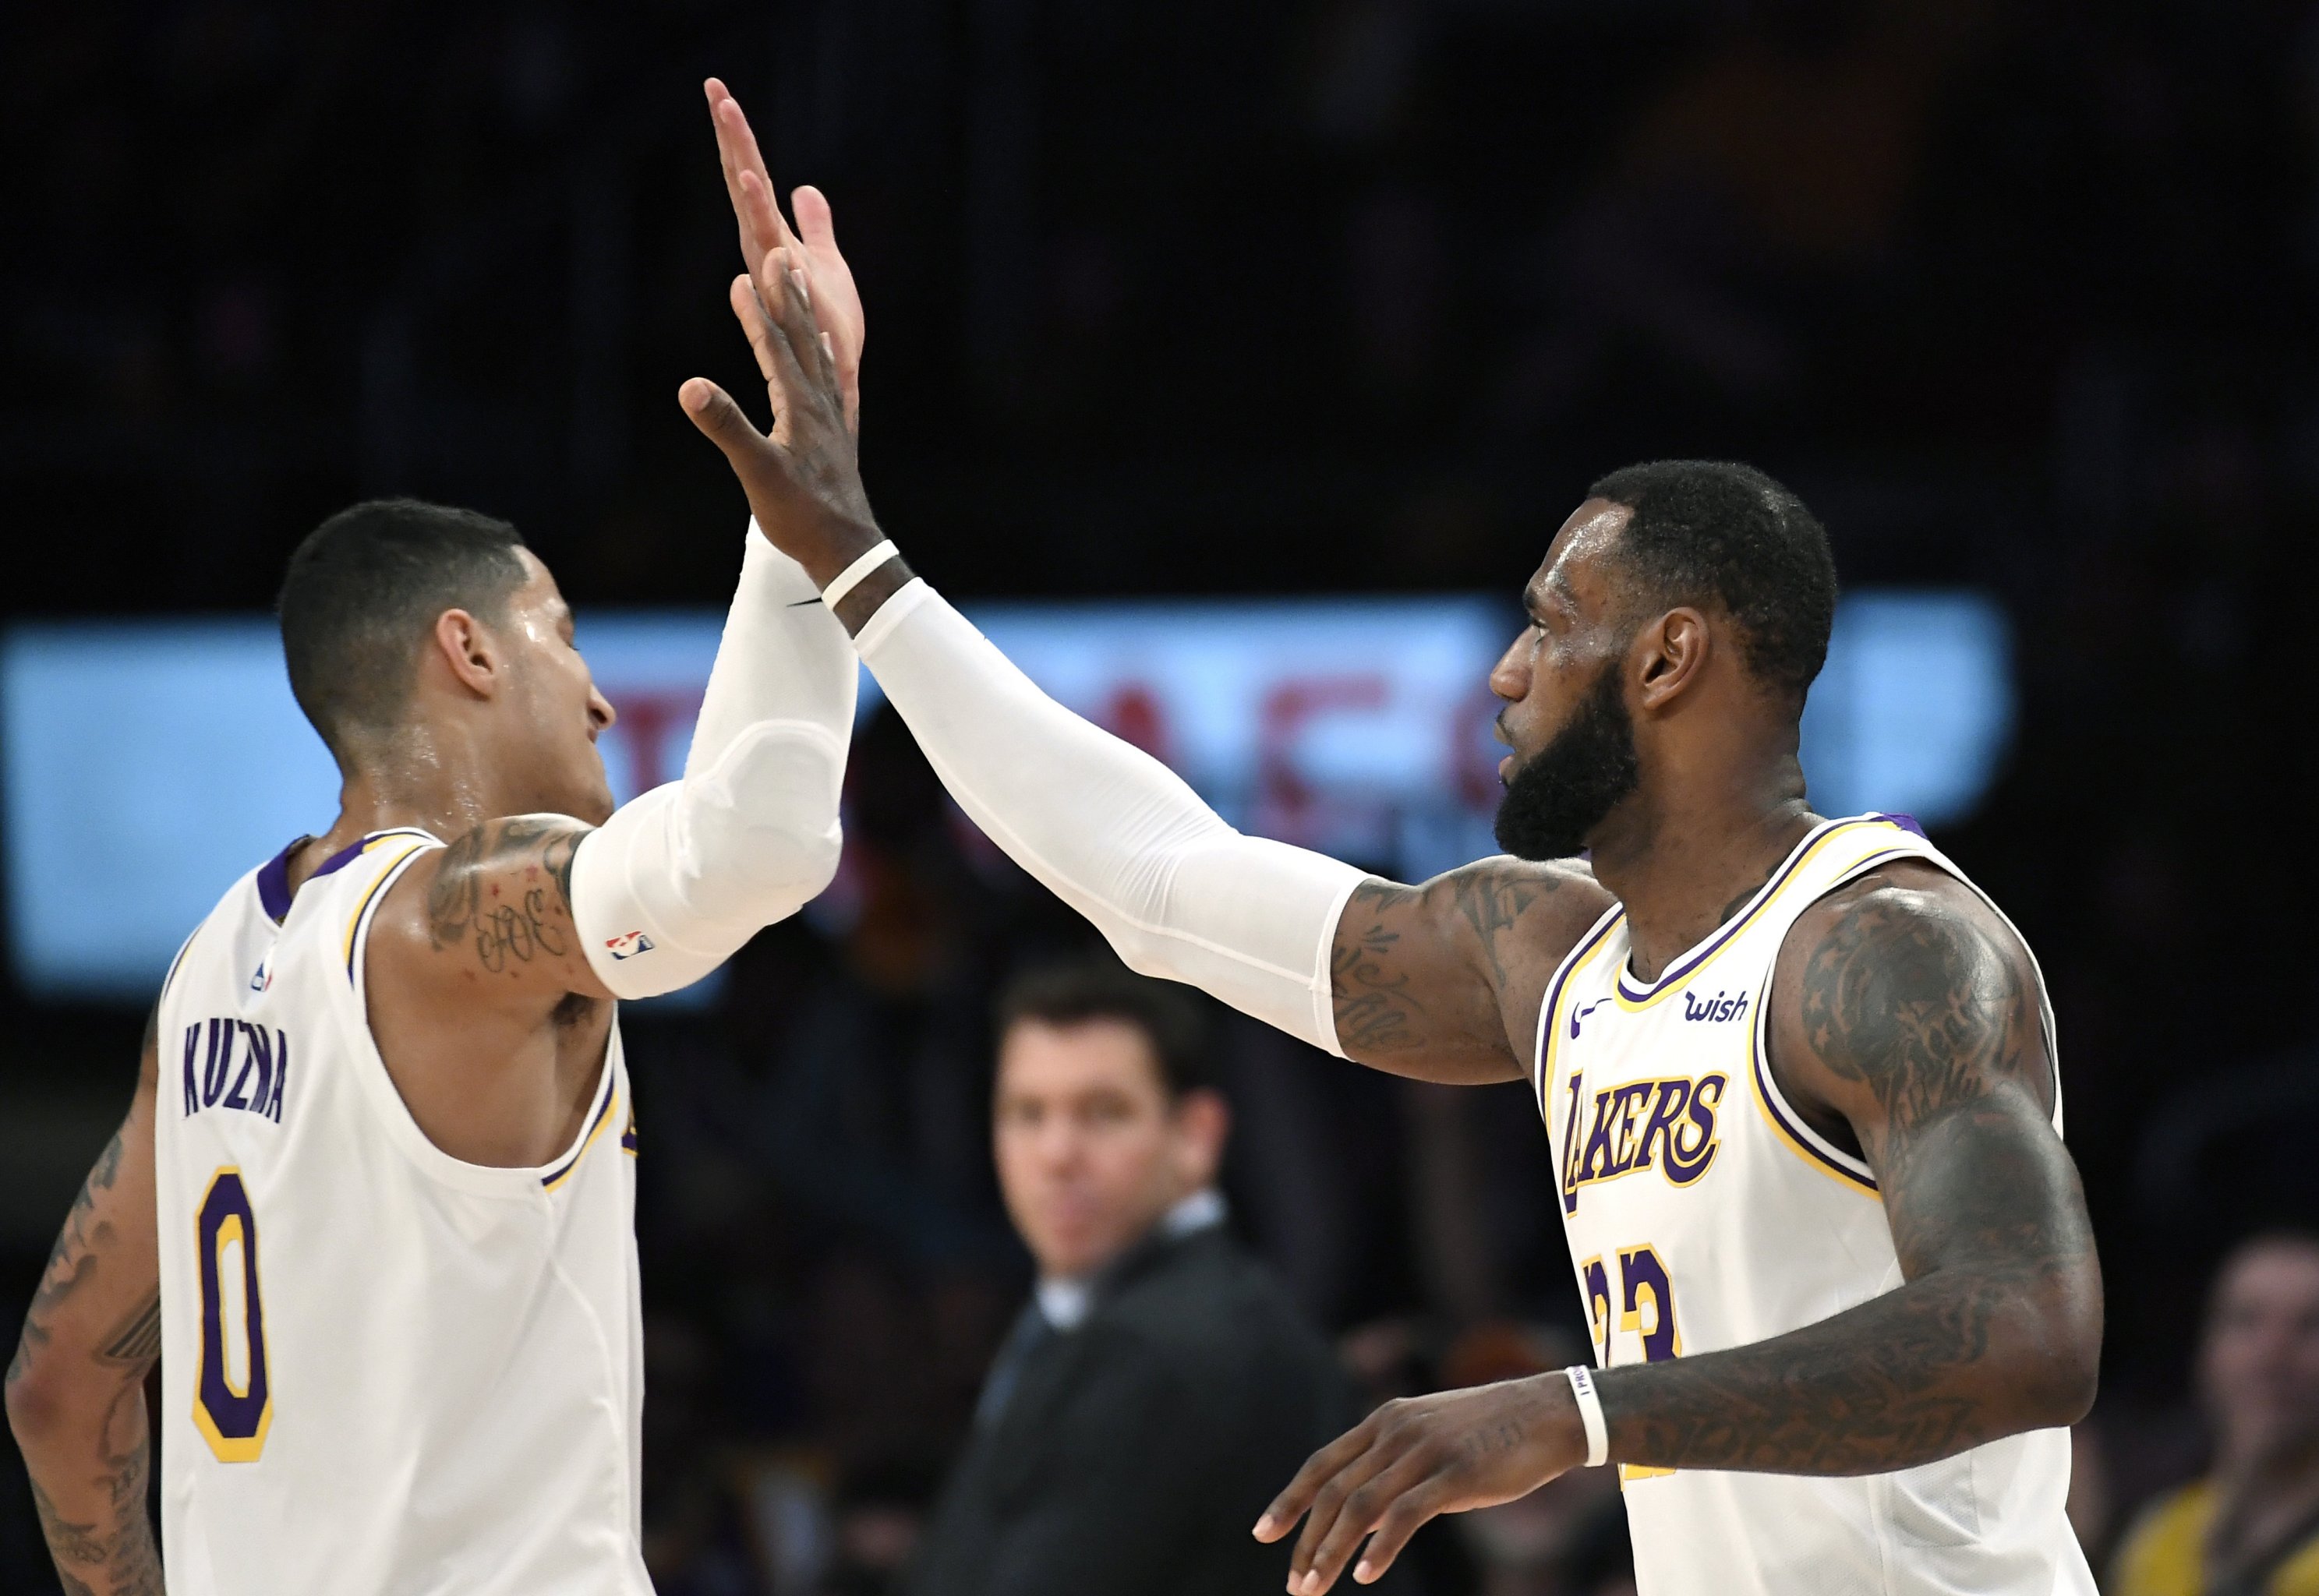 NBA: LeBron staying 'even keel' as Lakers look to bounce back